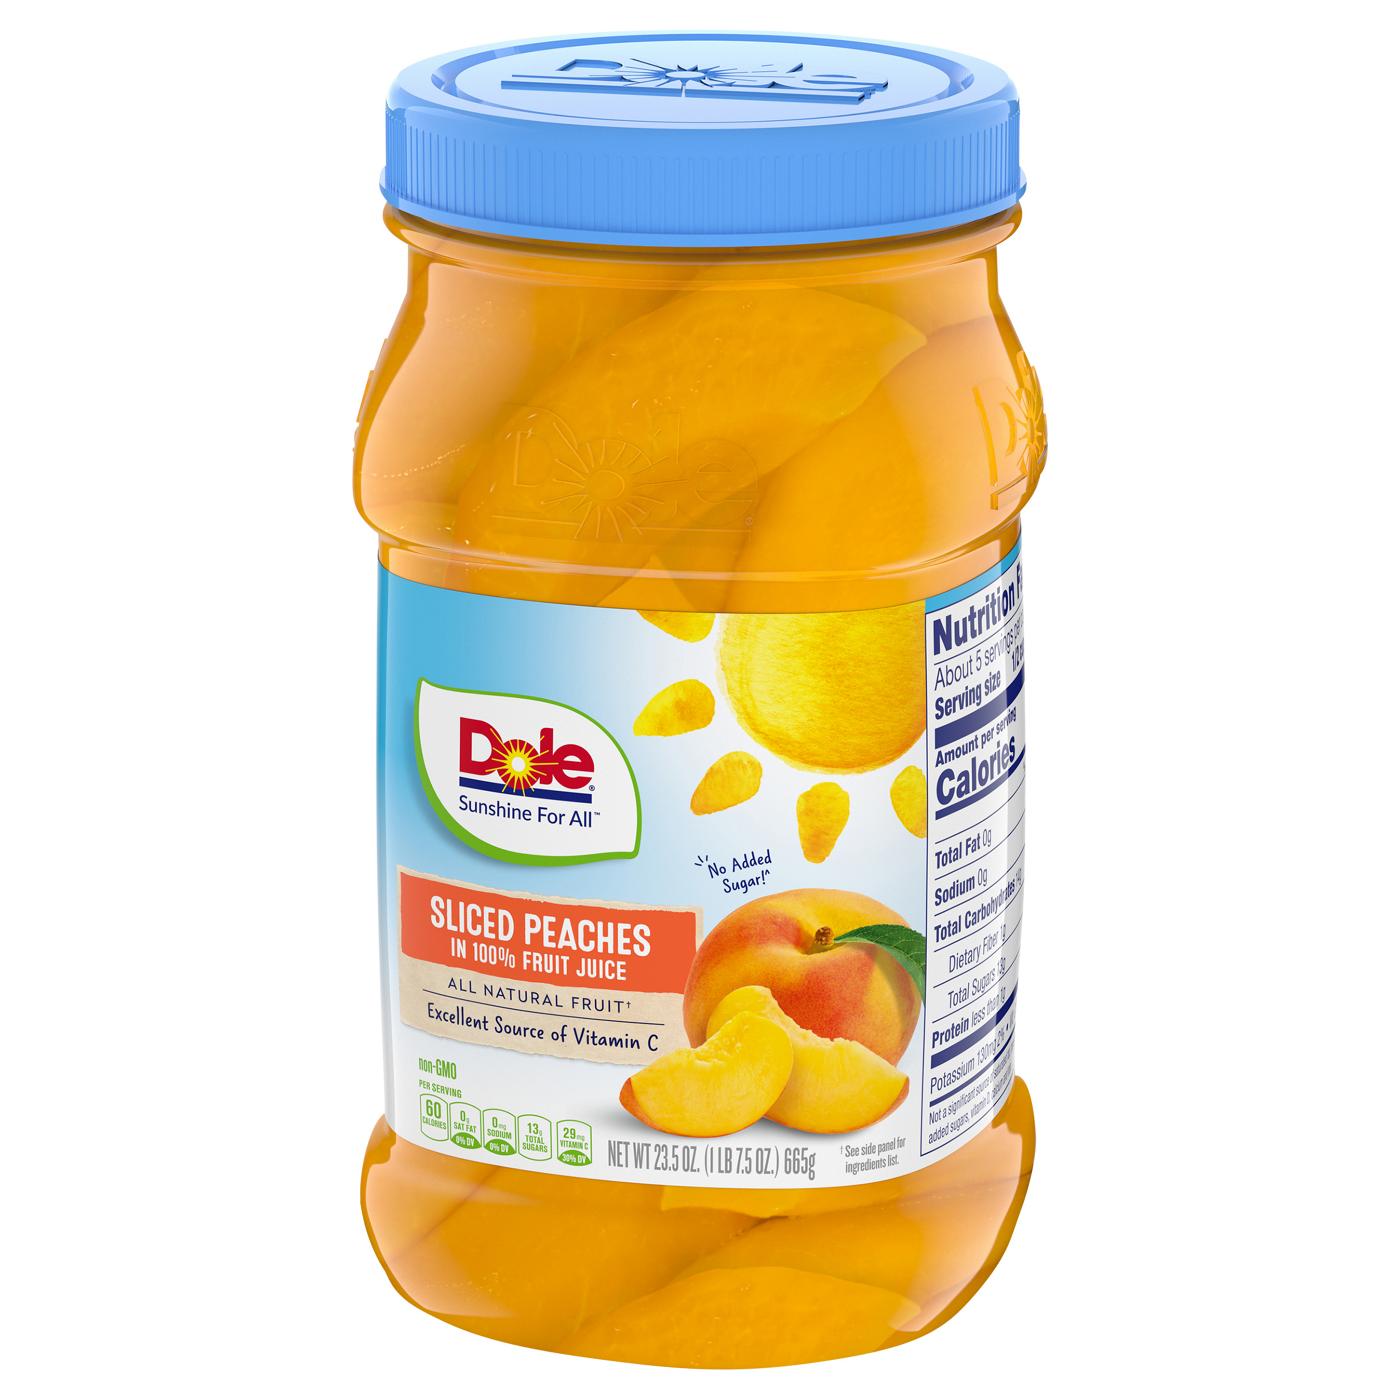 Dole Sliced Peaches in 100% Fruit Juice Jar - Shop Peaches, Plums, &  Apricots at H-E-B